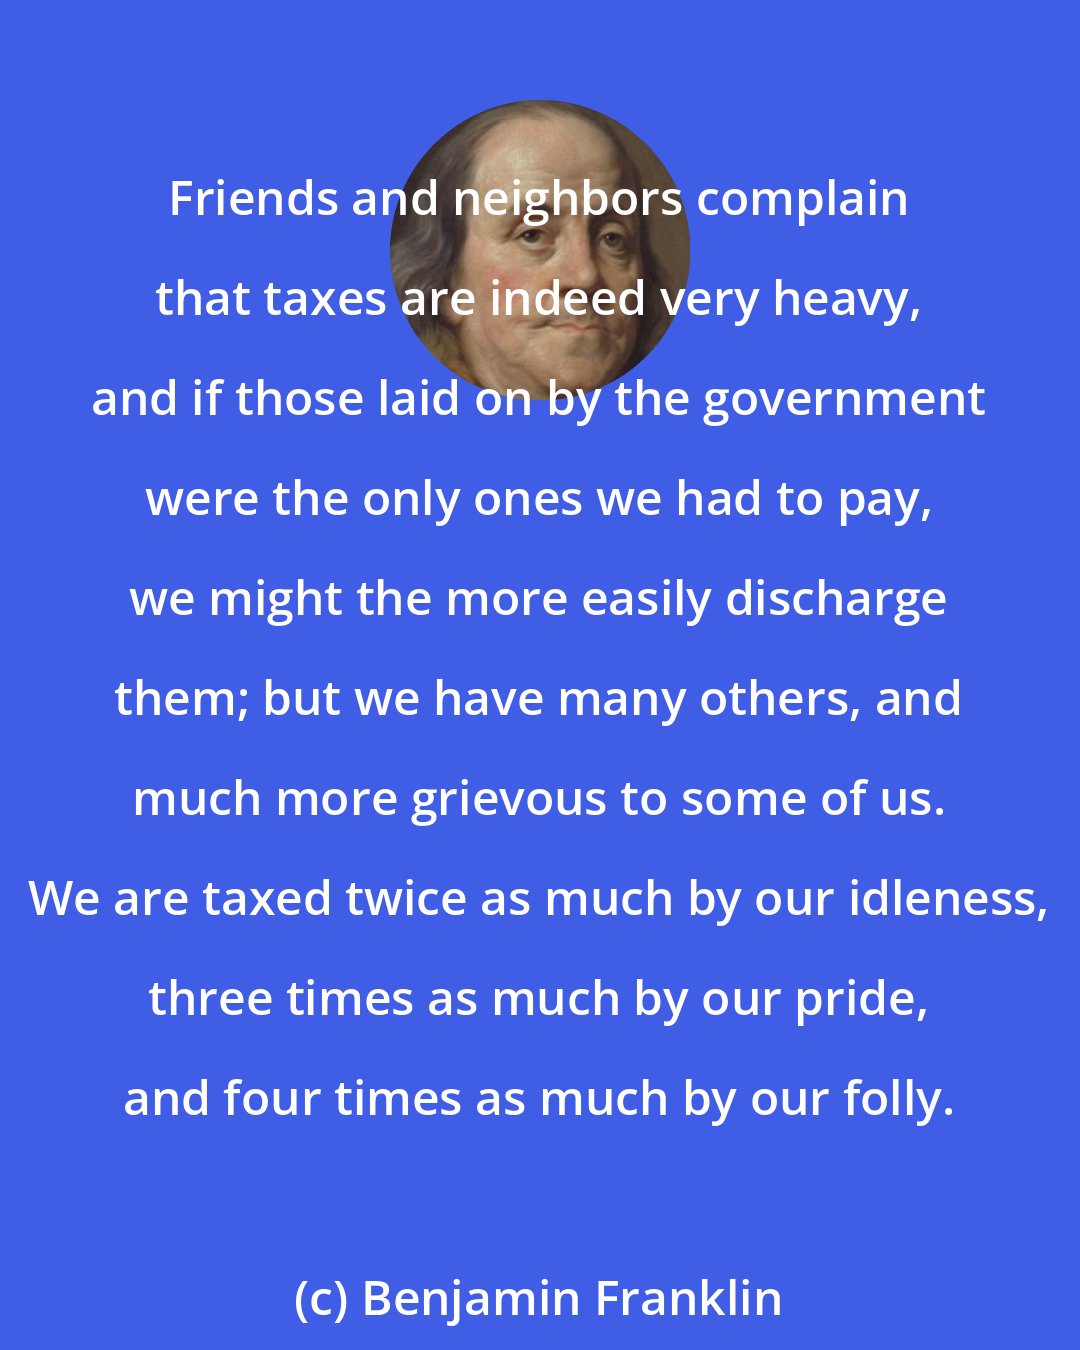 Benjamin Franklin: Friends and neighbors complain that taxes are indeed very heavy, and if those laid on by the government were the only ones we had to pay, we might the more easily discharge them; but we have many others, and much more grievous to some of us. We are taxed twice as much by our idleness, three times as much by our pride, and four times as much by our folly.